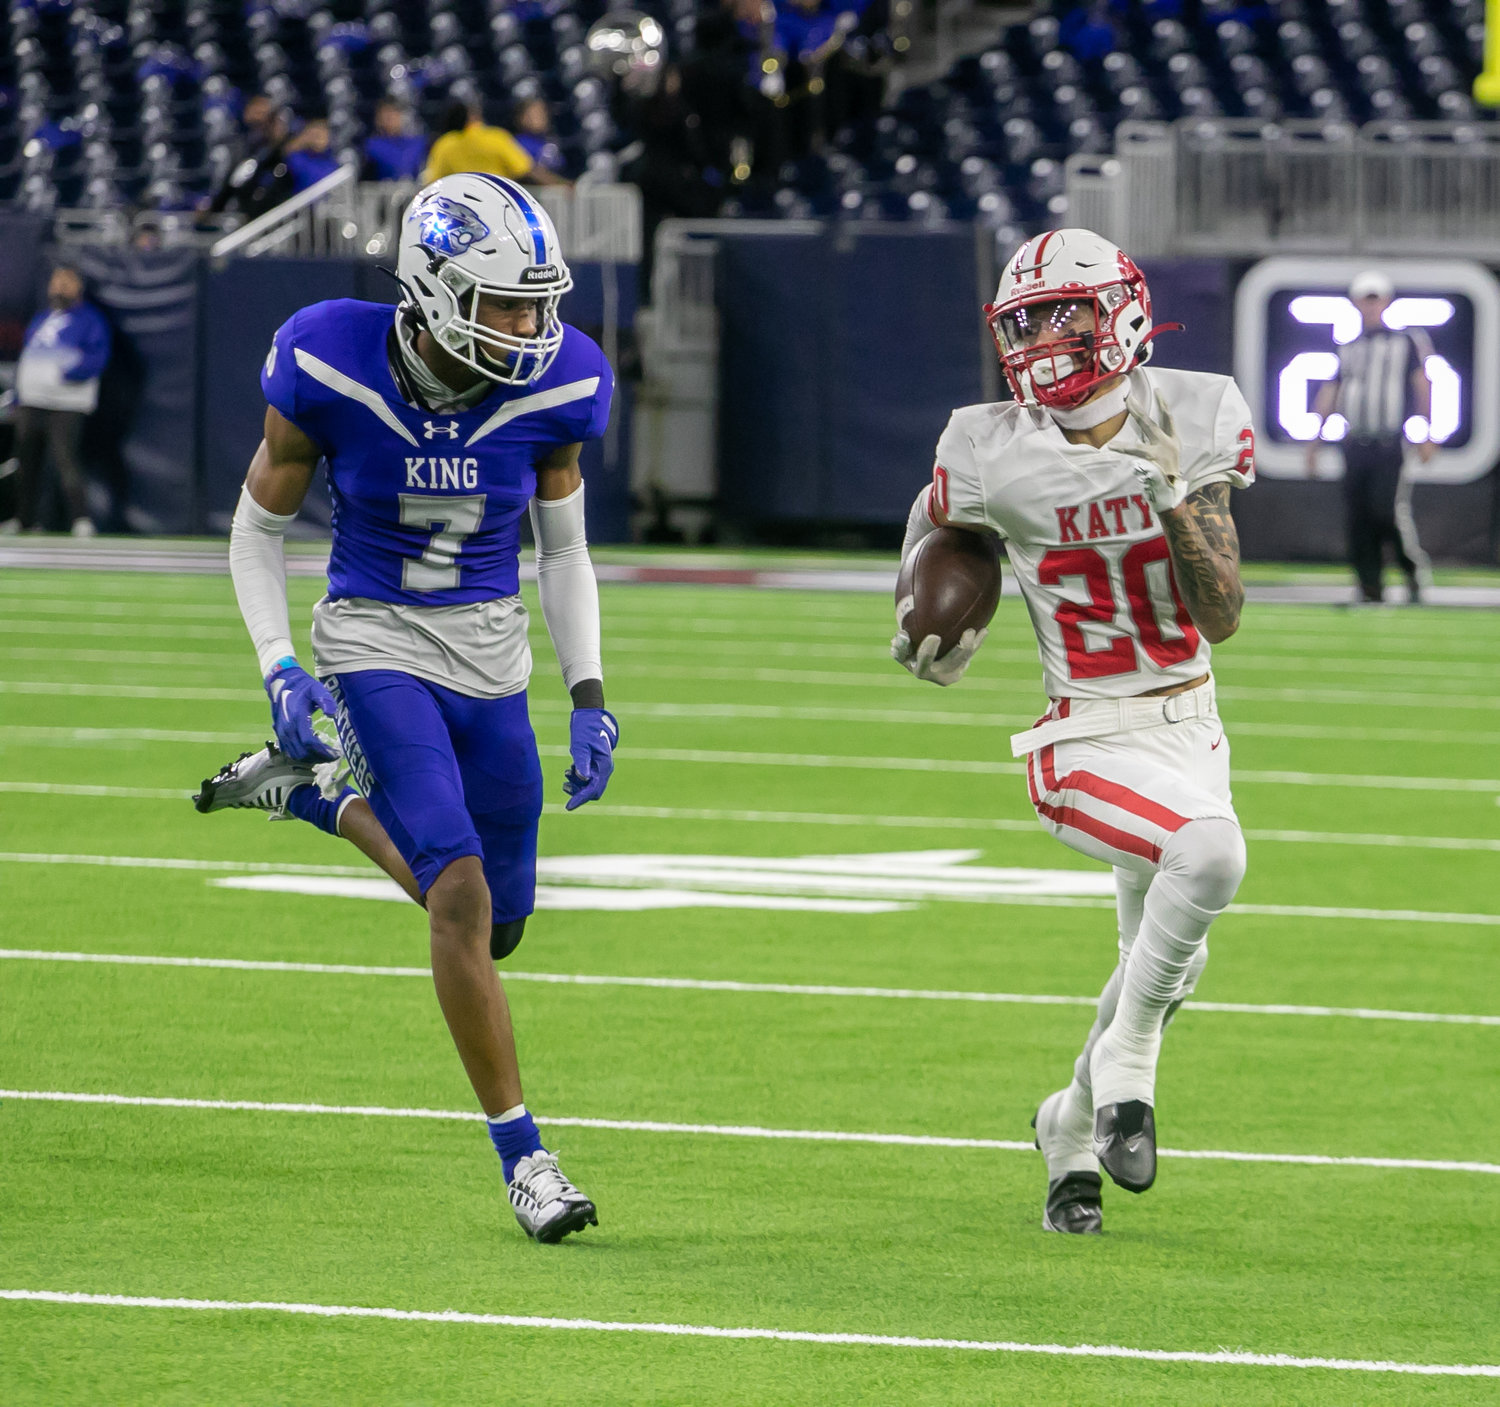 Micah Koenig tries to outrun a defender during Friday's Class 6A-Division II Region III Final between Katy and C.E. King at NRG Stadium.